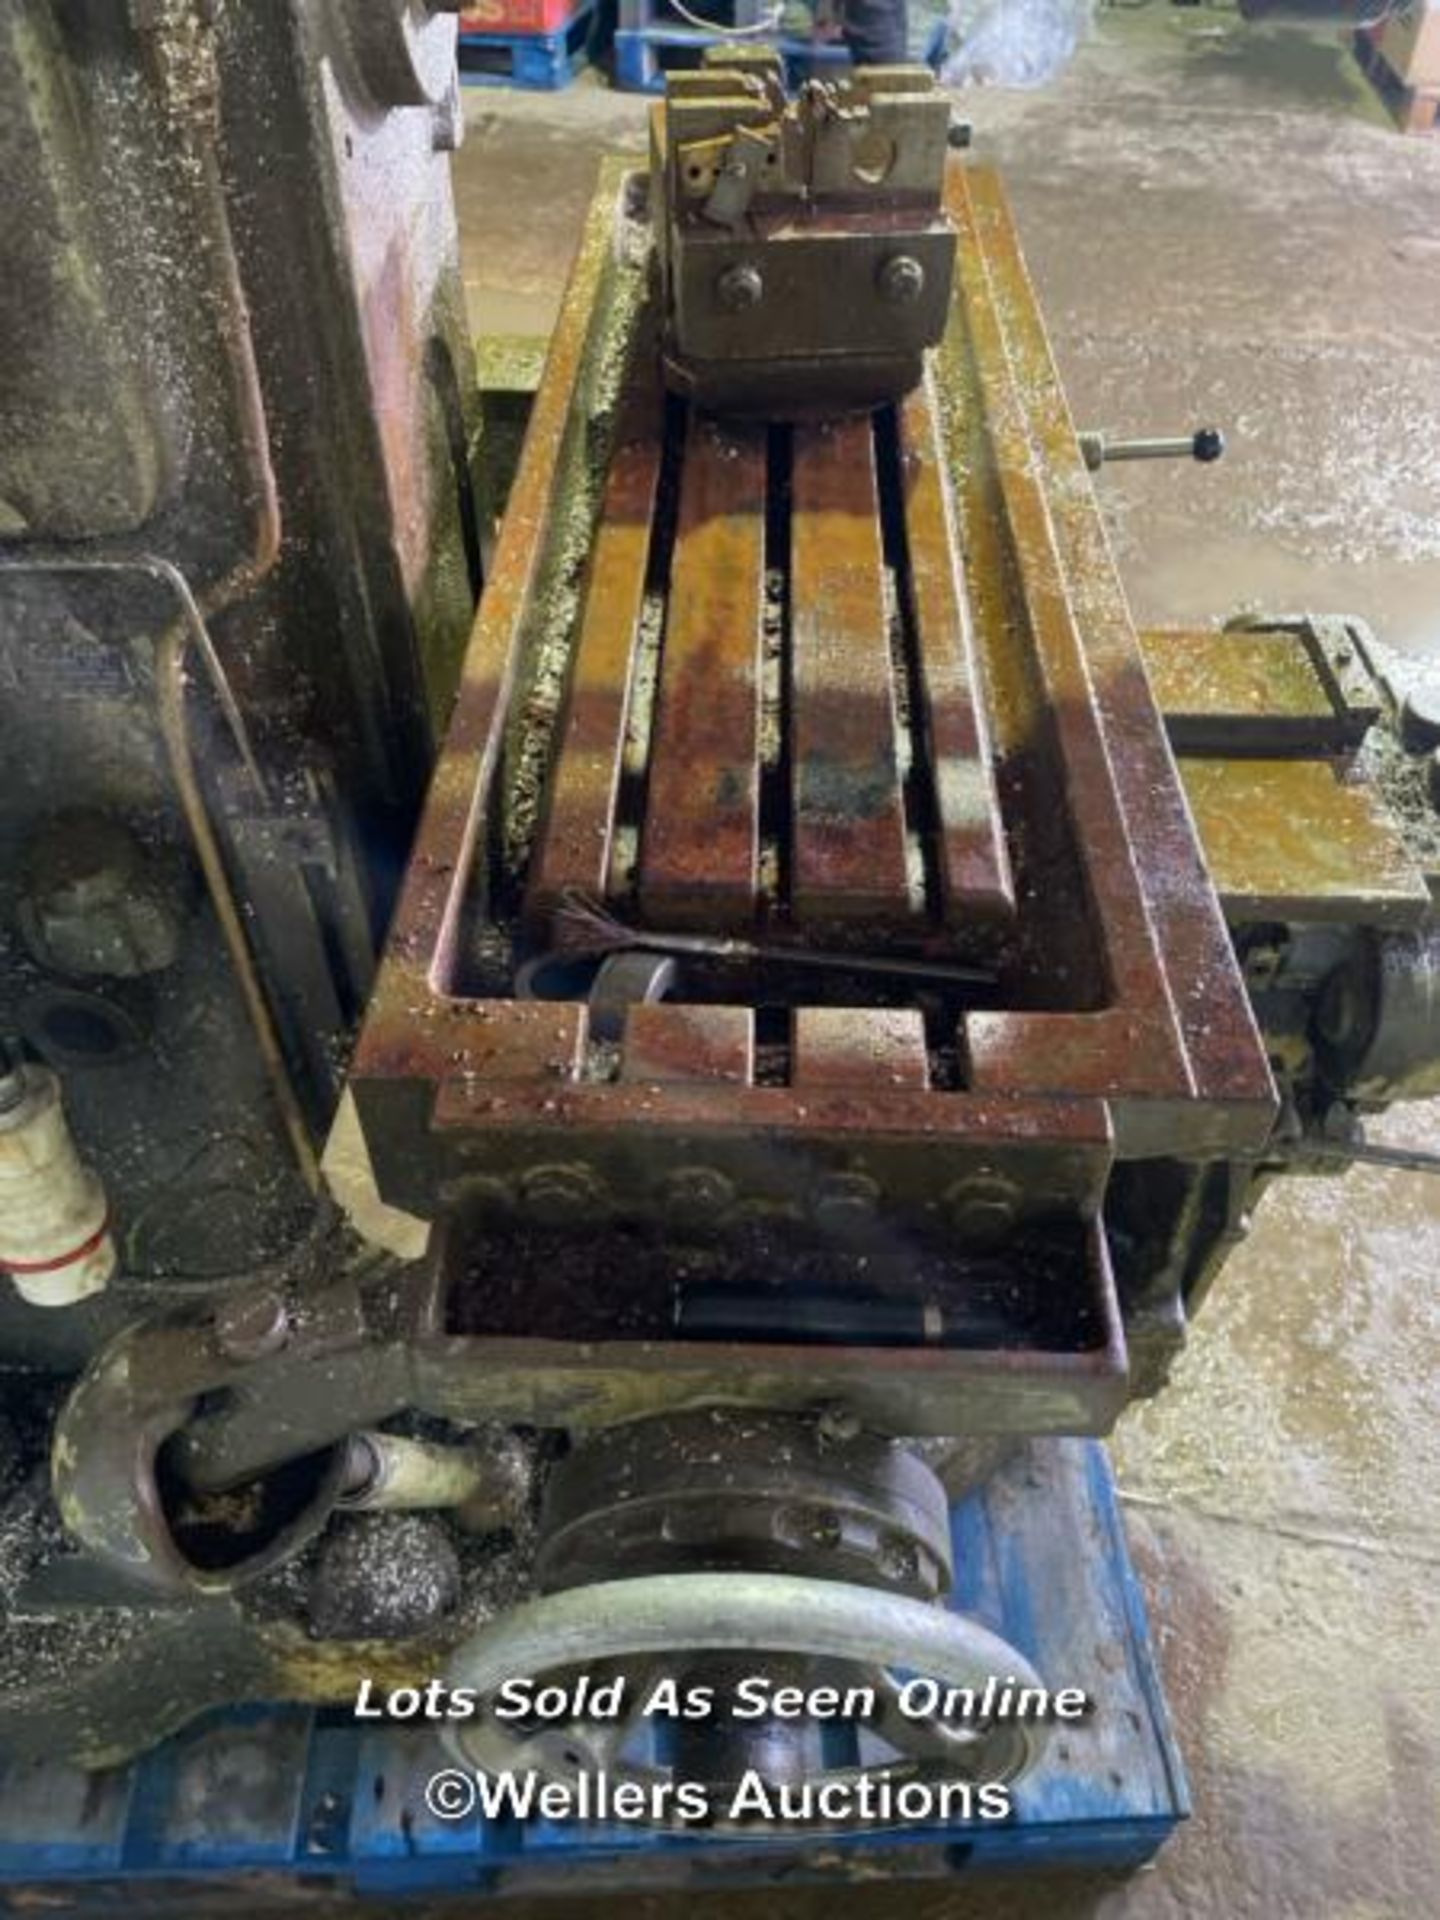 VINTAGE ALFRED HERBERT LTD. HORIZONTAL MILL, WITH VICE, IN WORKING ORDER - Image 10 of 10